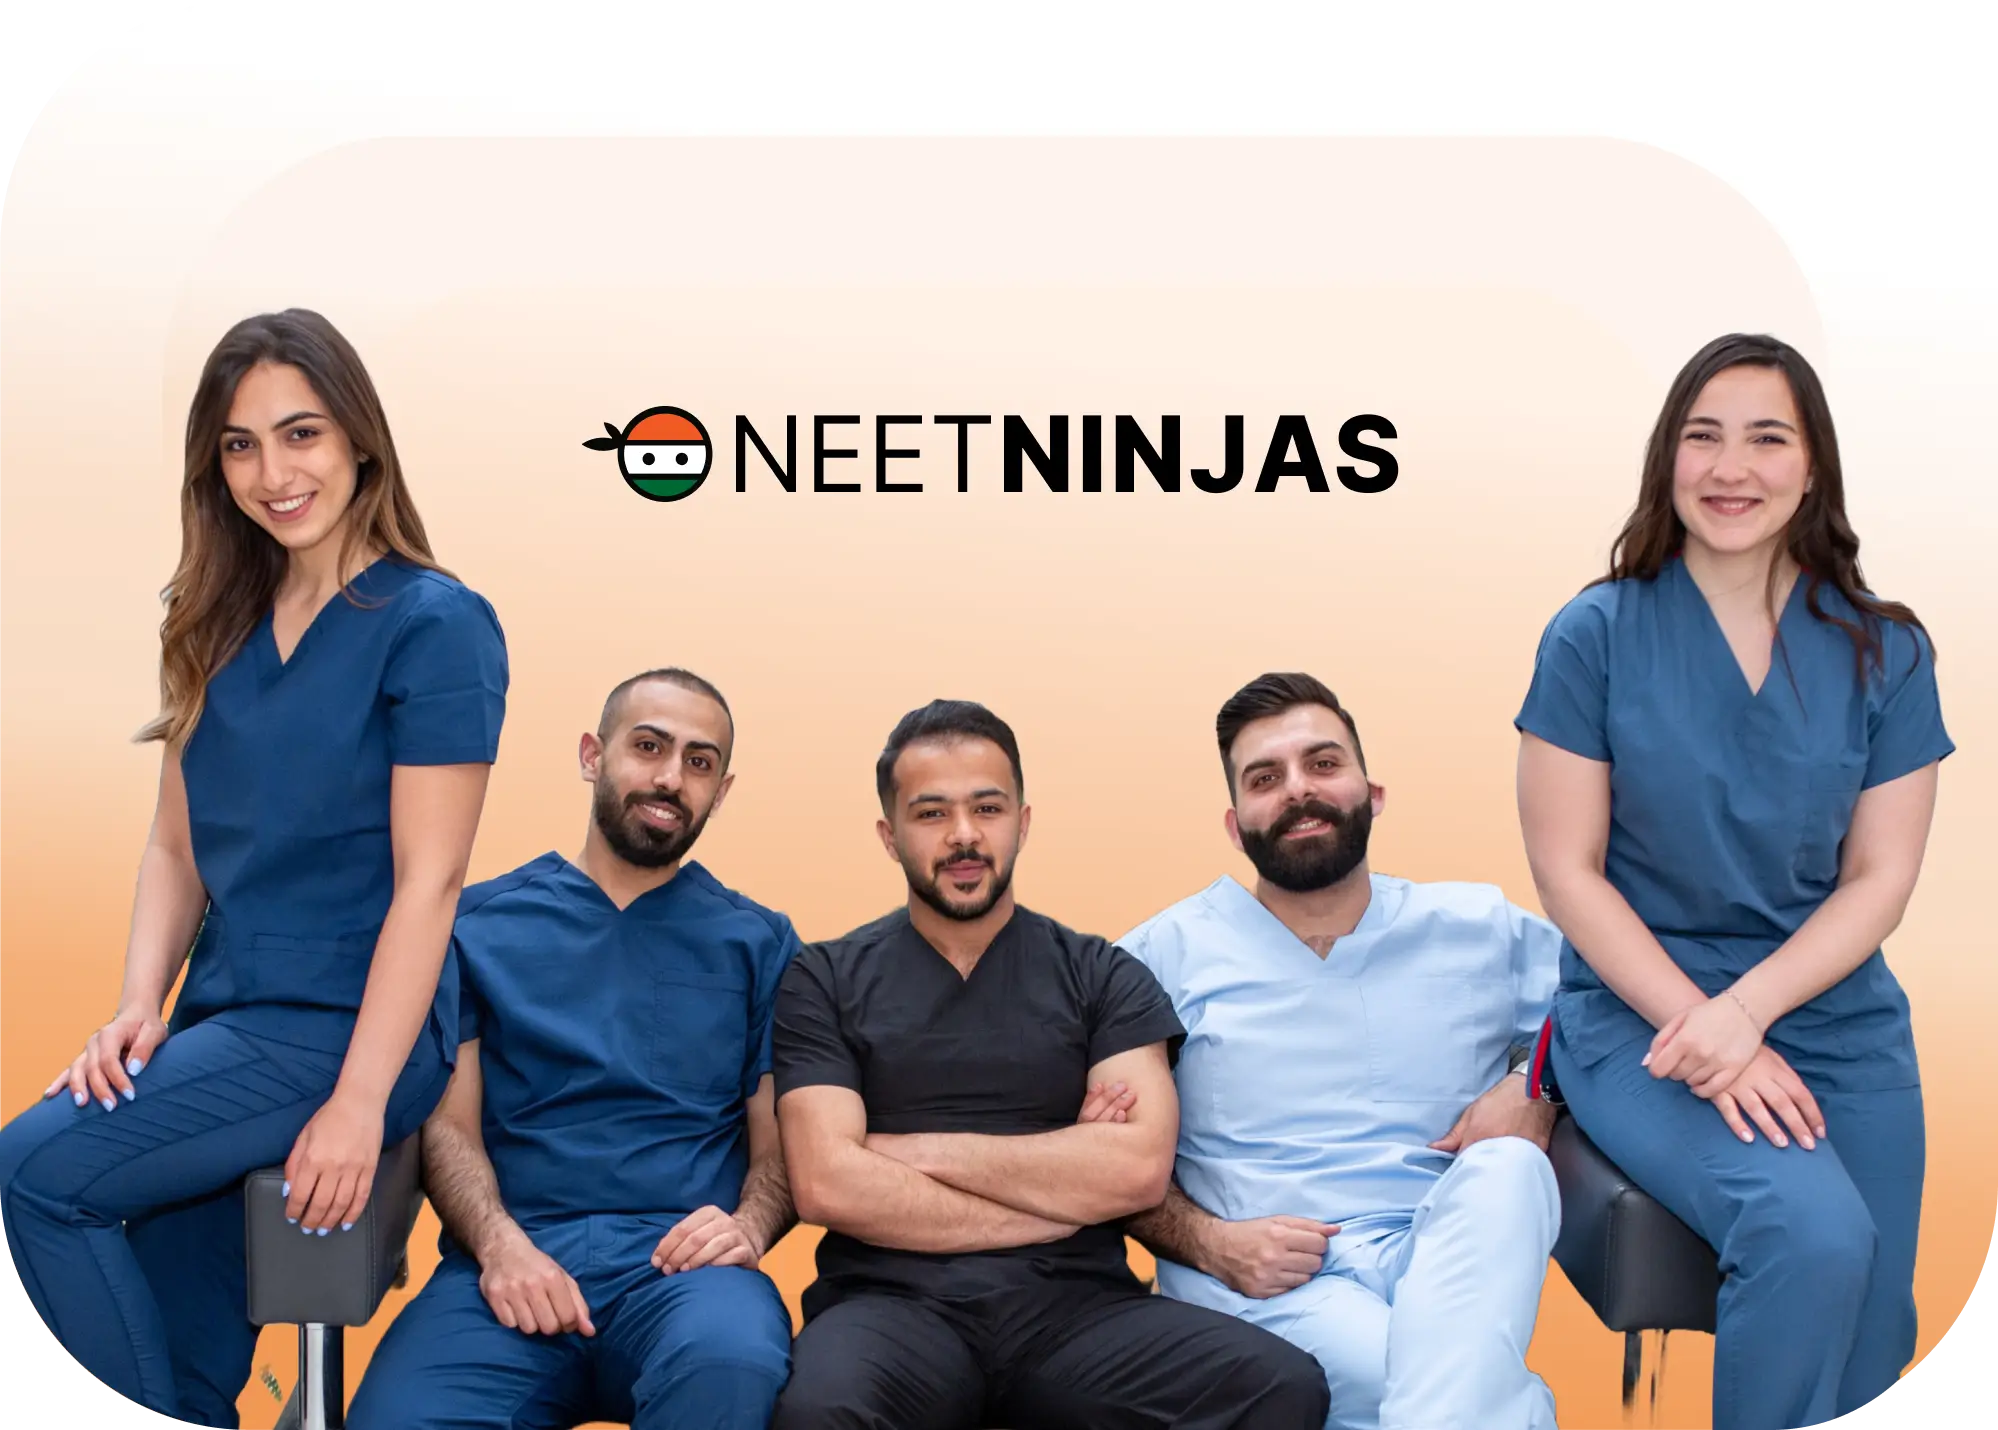 NEET Ninjas.com Founders group photo - Your ticket to pass NEET Entrance Exam for medical university in India with ease.